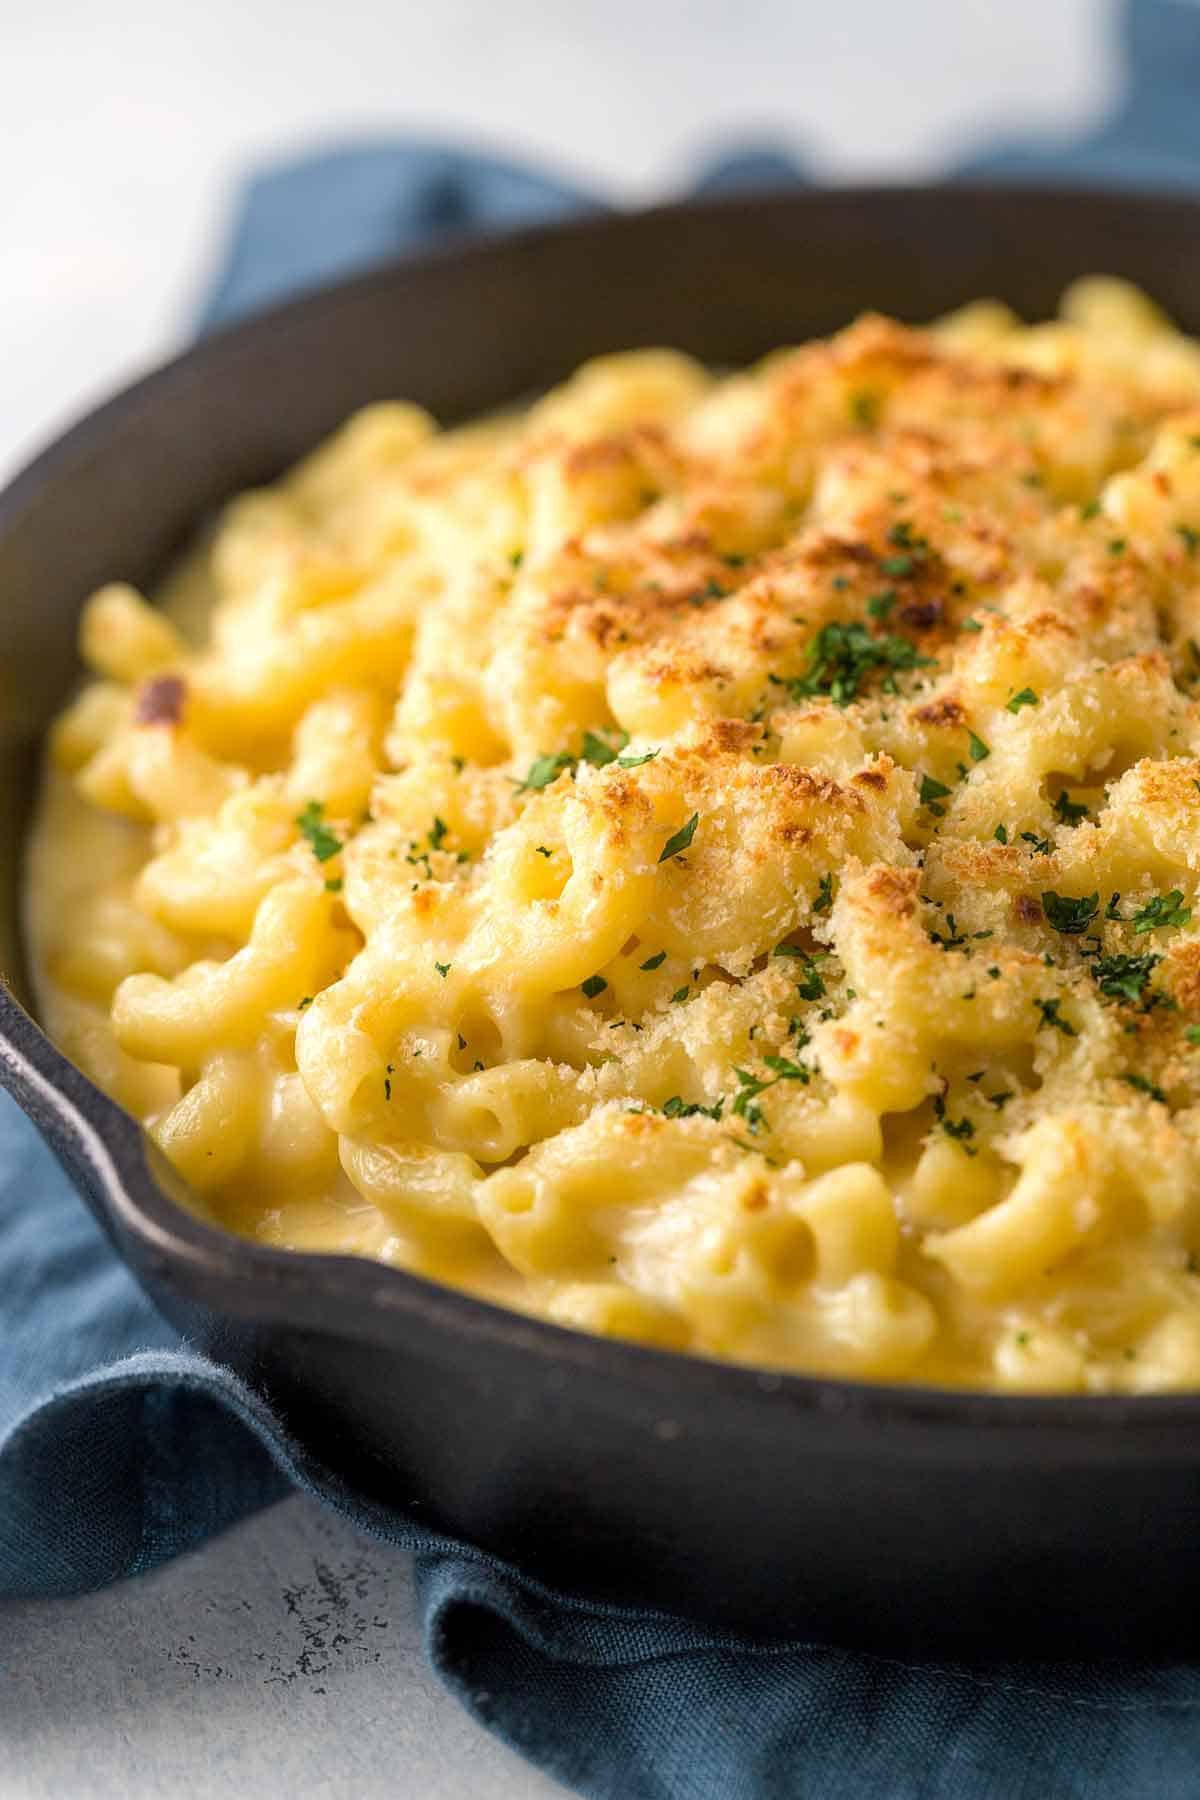 Baked Mac and Cheese Recipes with Bread Crumbs Fresh Baked Macaroni and Cheese Jessica Gavin